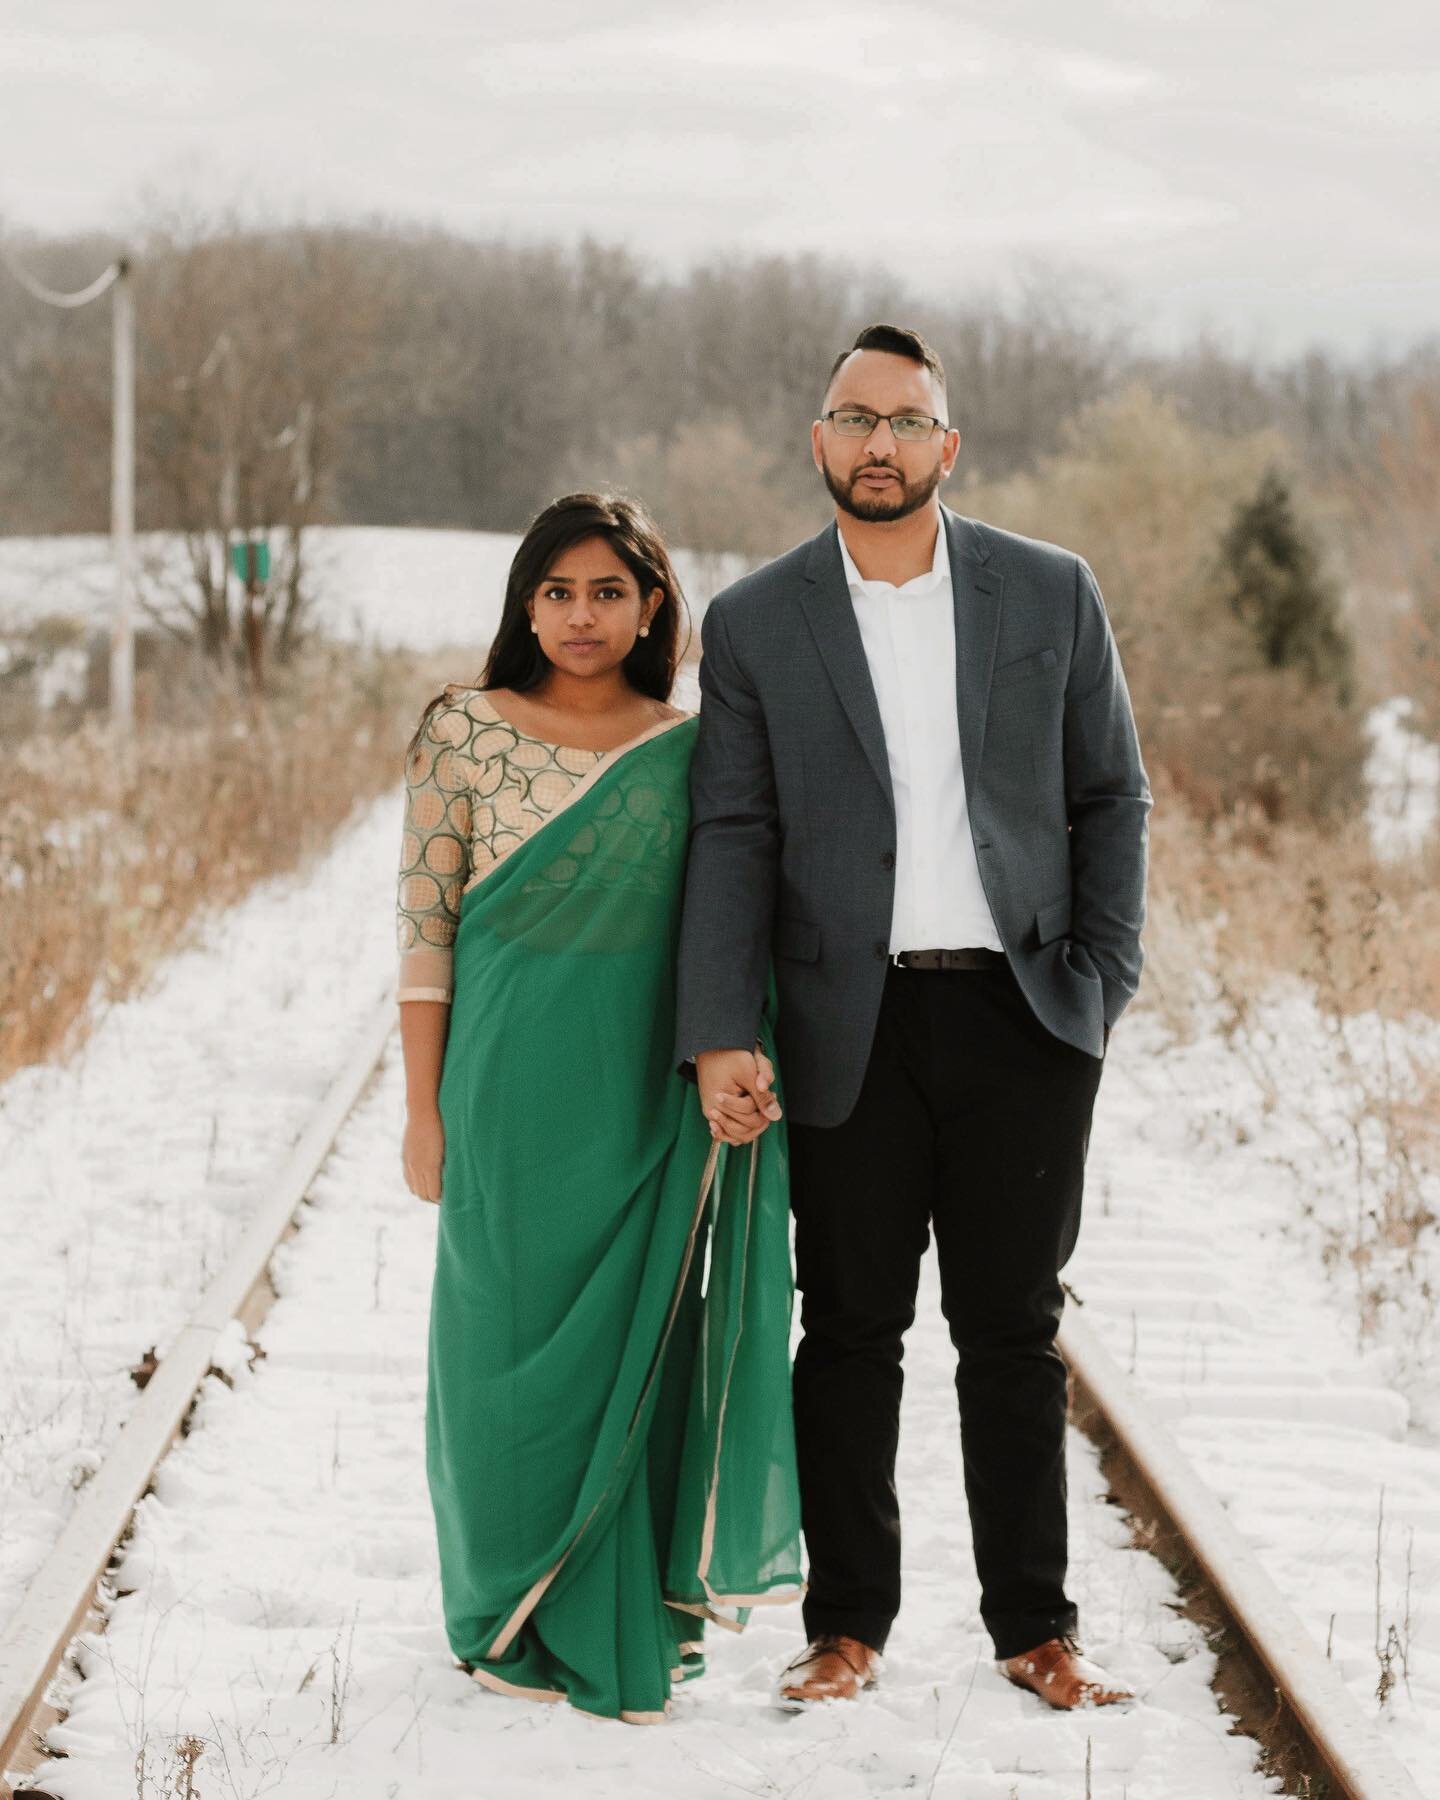 Decided I&rsquo;m going to start posting photos from the archives more often, starting with this one. That sari. That location. That couple! 

Wearing an outfit to your photoshoot that&rsquo;s meaningful to you or reflective of who you are instead of